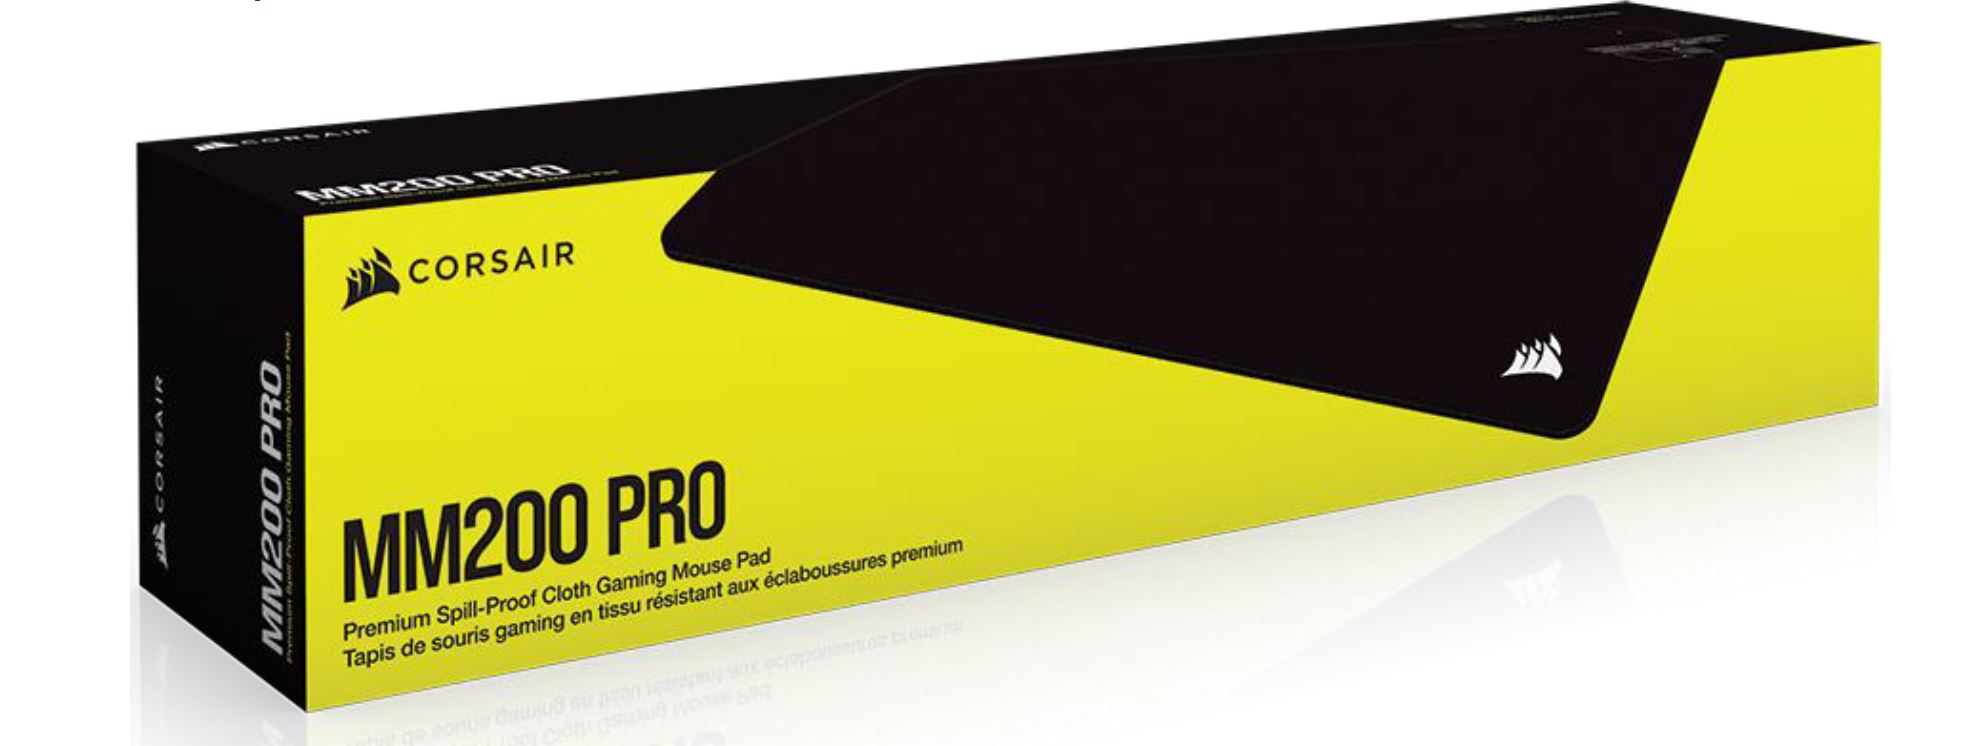 Corsair MM200 PRO Spill-Proof Cloth Gaming Mouse Pad – Heavy – 450mm 400mm surface, Black Surface | ManIT Technology Pty Ltd